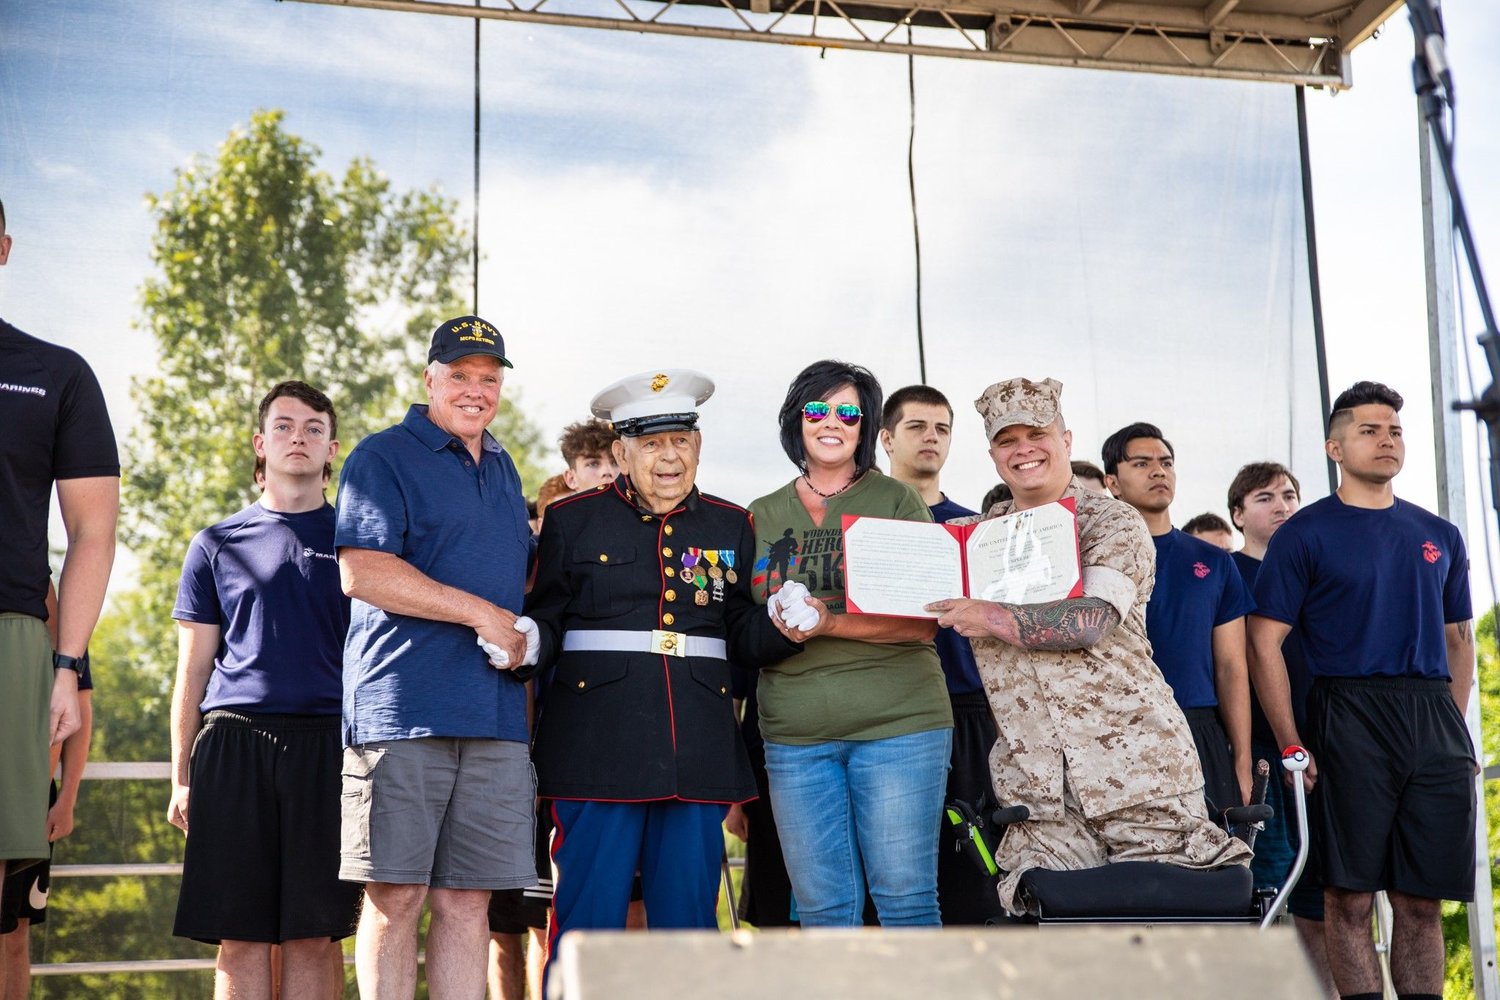 At the 2019 Wounded Hero 5K, WWII and Korean War Veteran Sgt. Sam Bonanno, United States Marine Corps, is awarded his Purple Heart one year before he passed away. Also in uniform is Cpl. Tyler Southern, Afghanistan Veteran Wounded Warrior.